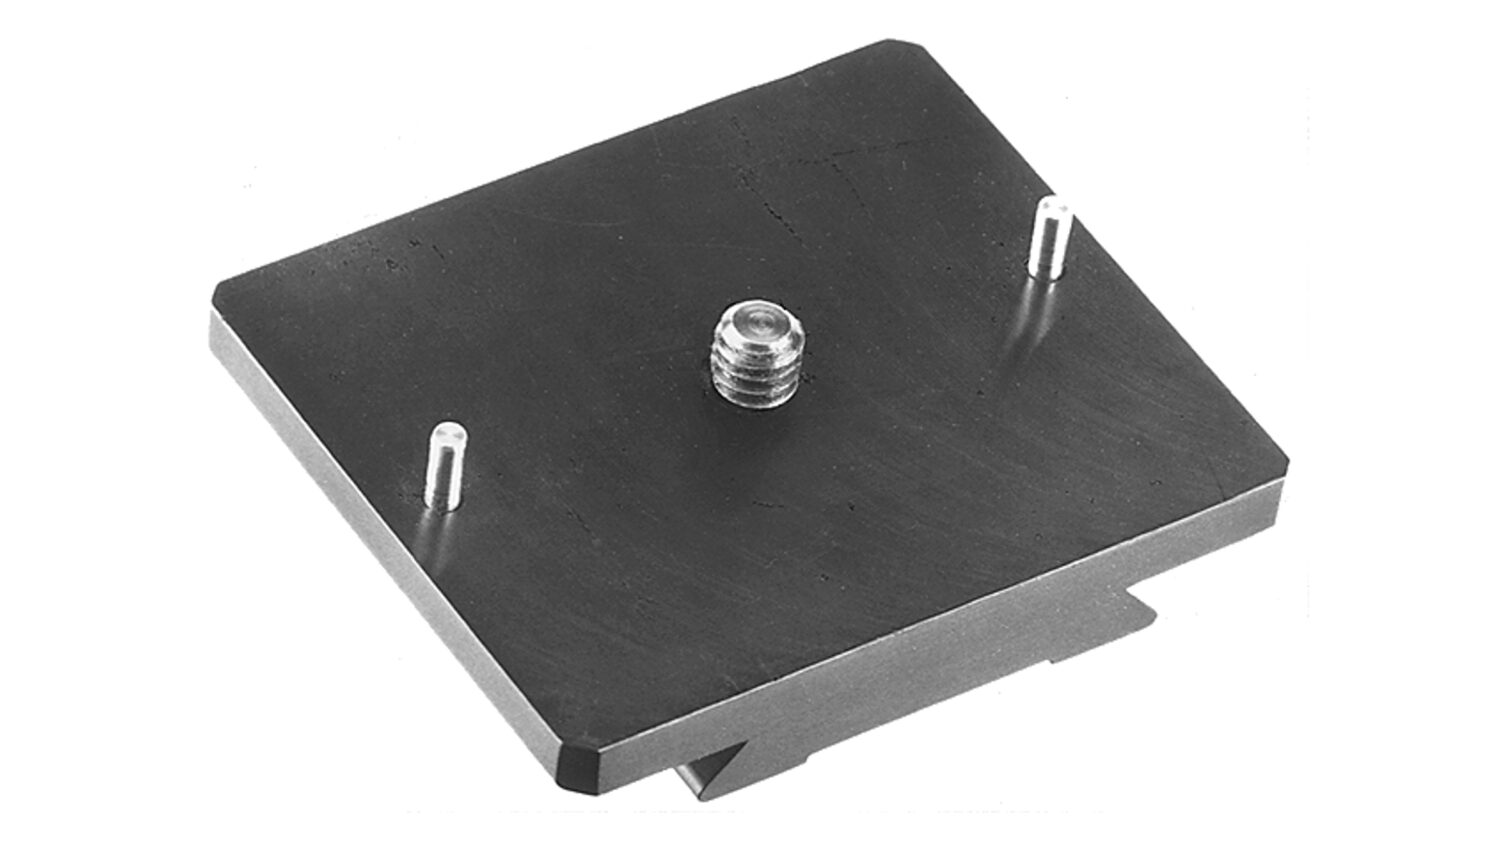 FOBA quick-release plate for PHASEONE and MAMIYA cameras